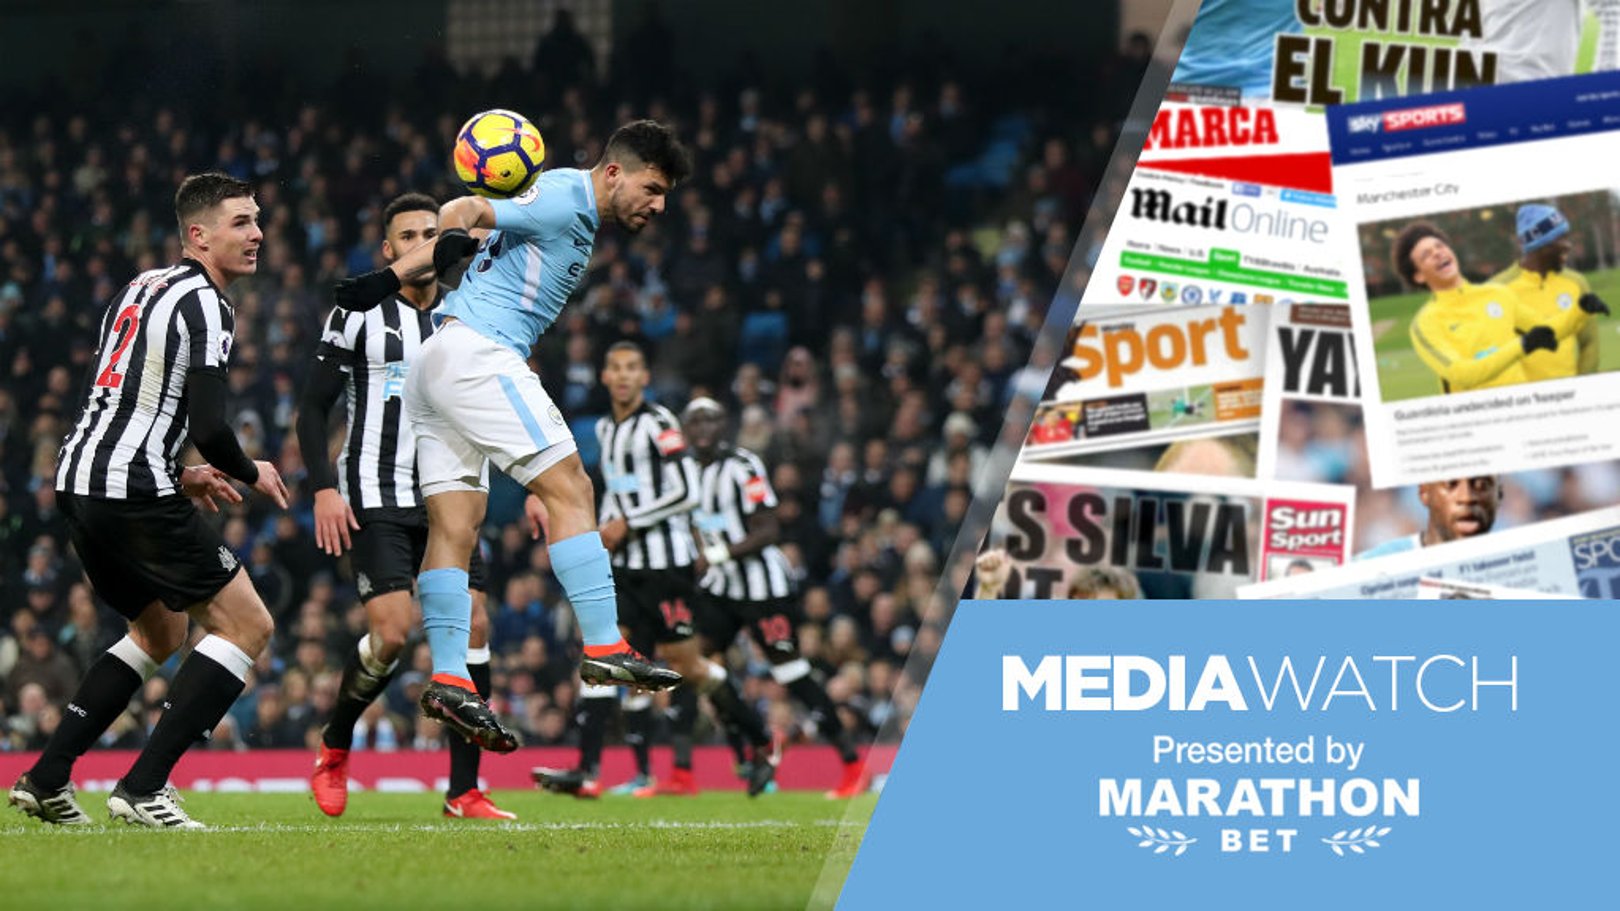 Media: A word from Benitez and PL predictions